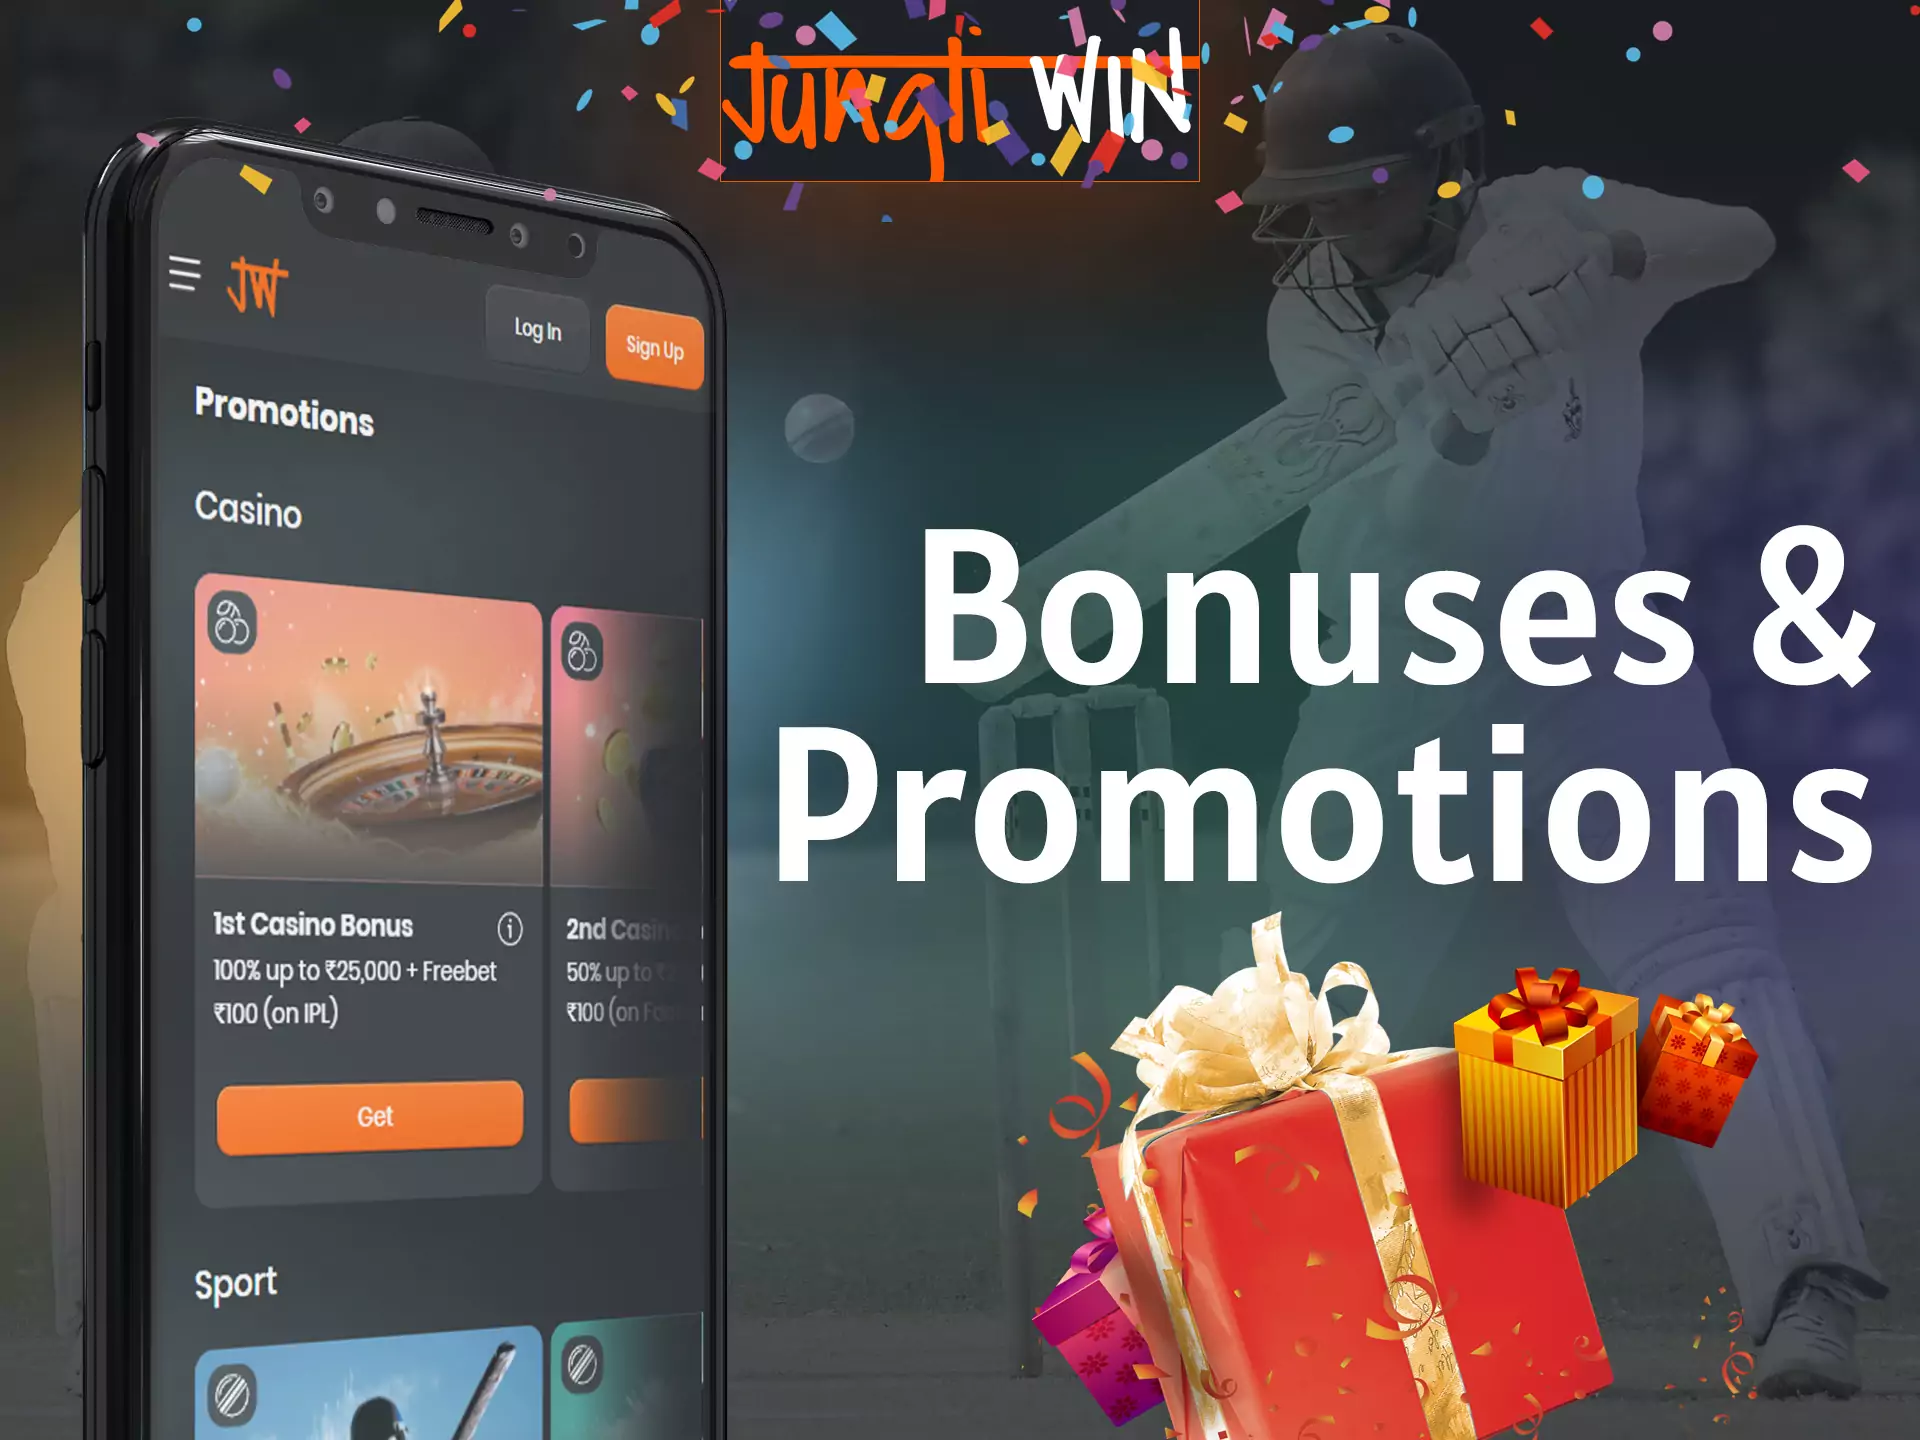 Jungliwin offers players various profitable bonuses and promostions.